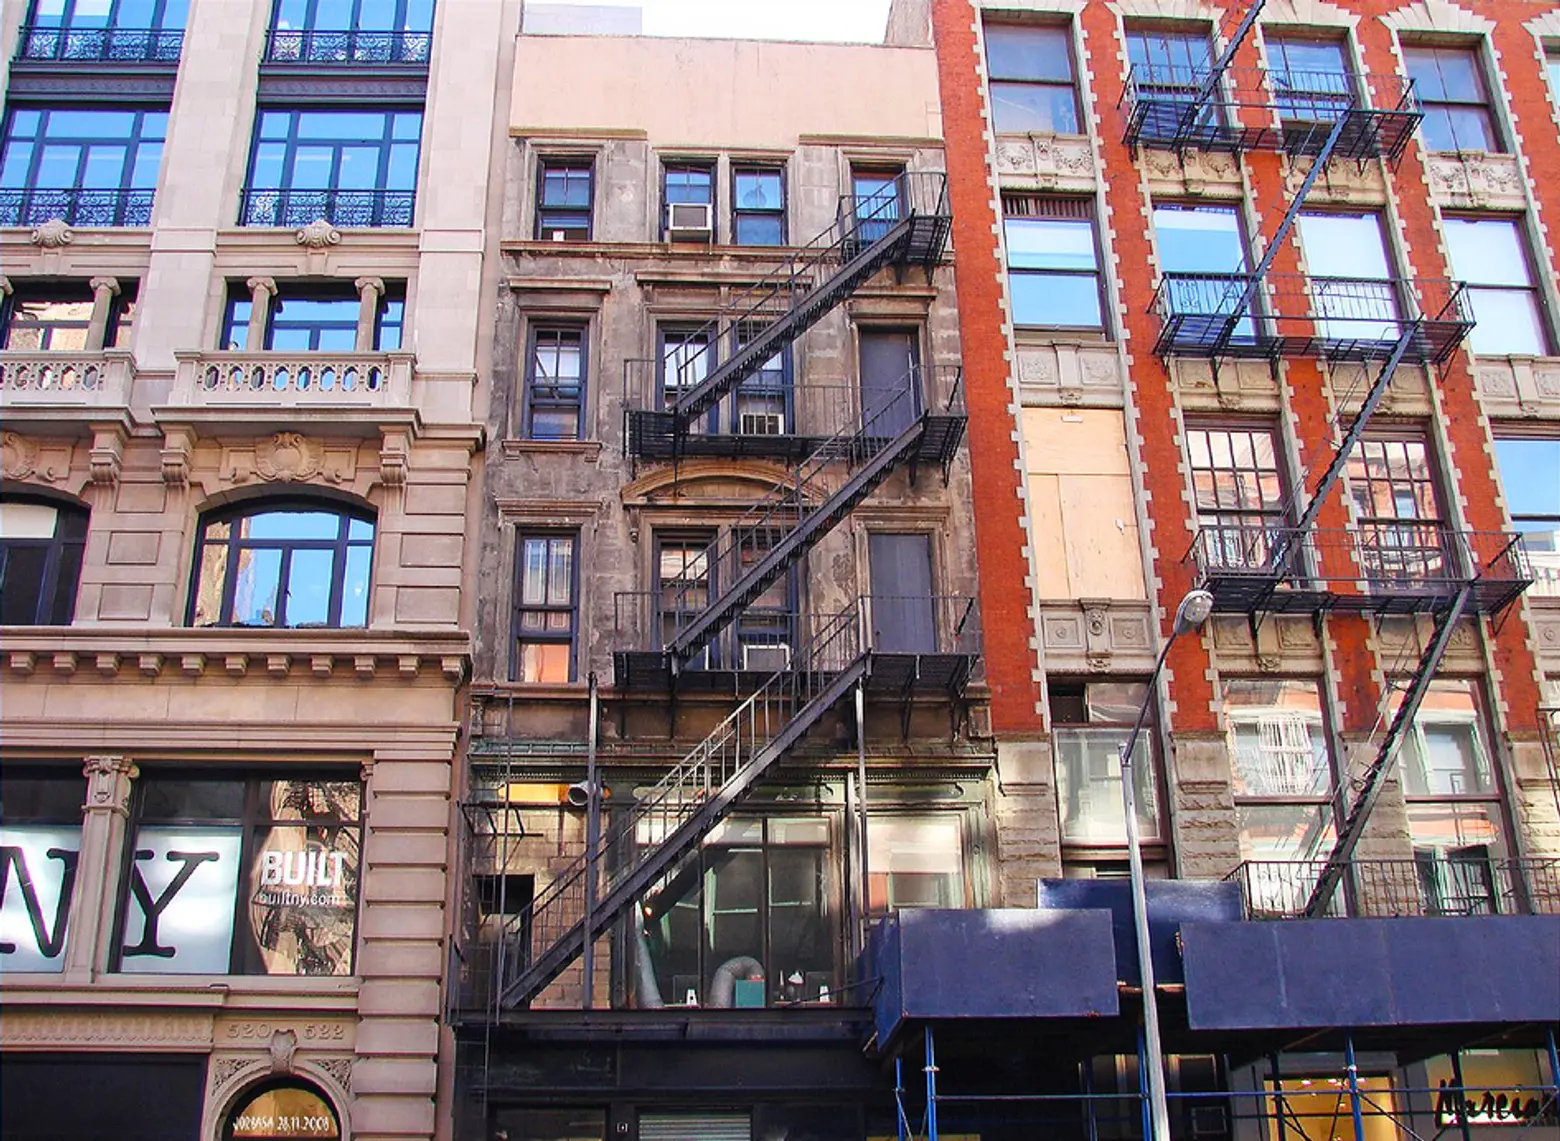 Since 1993, NYC has lost 152,000 regulated units after landlords increased rent, report says